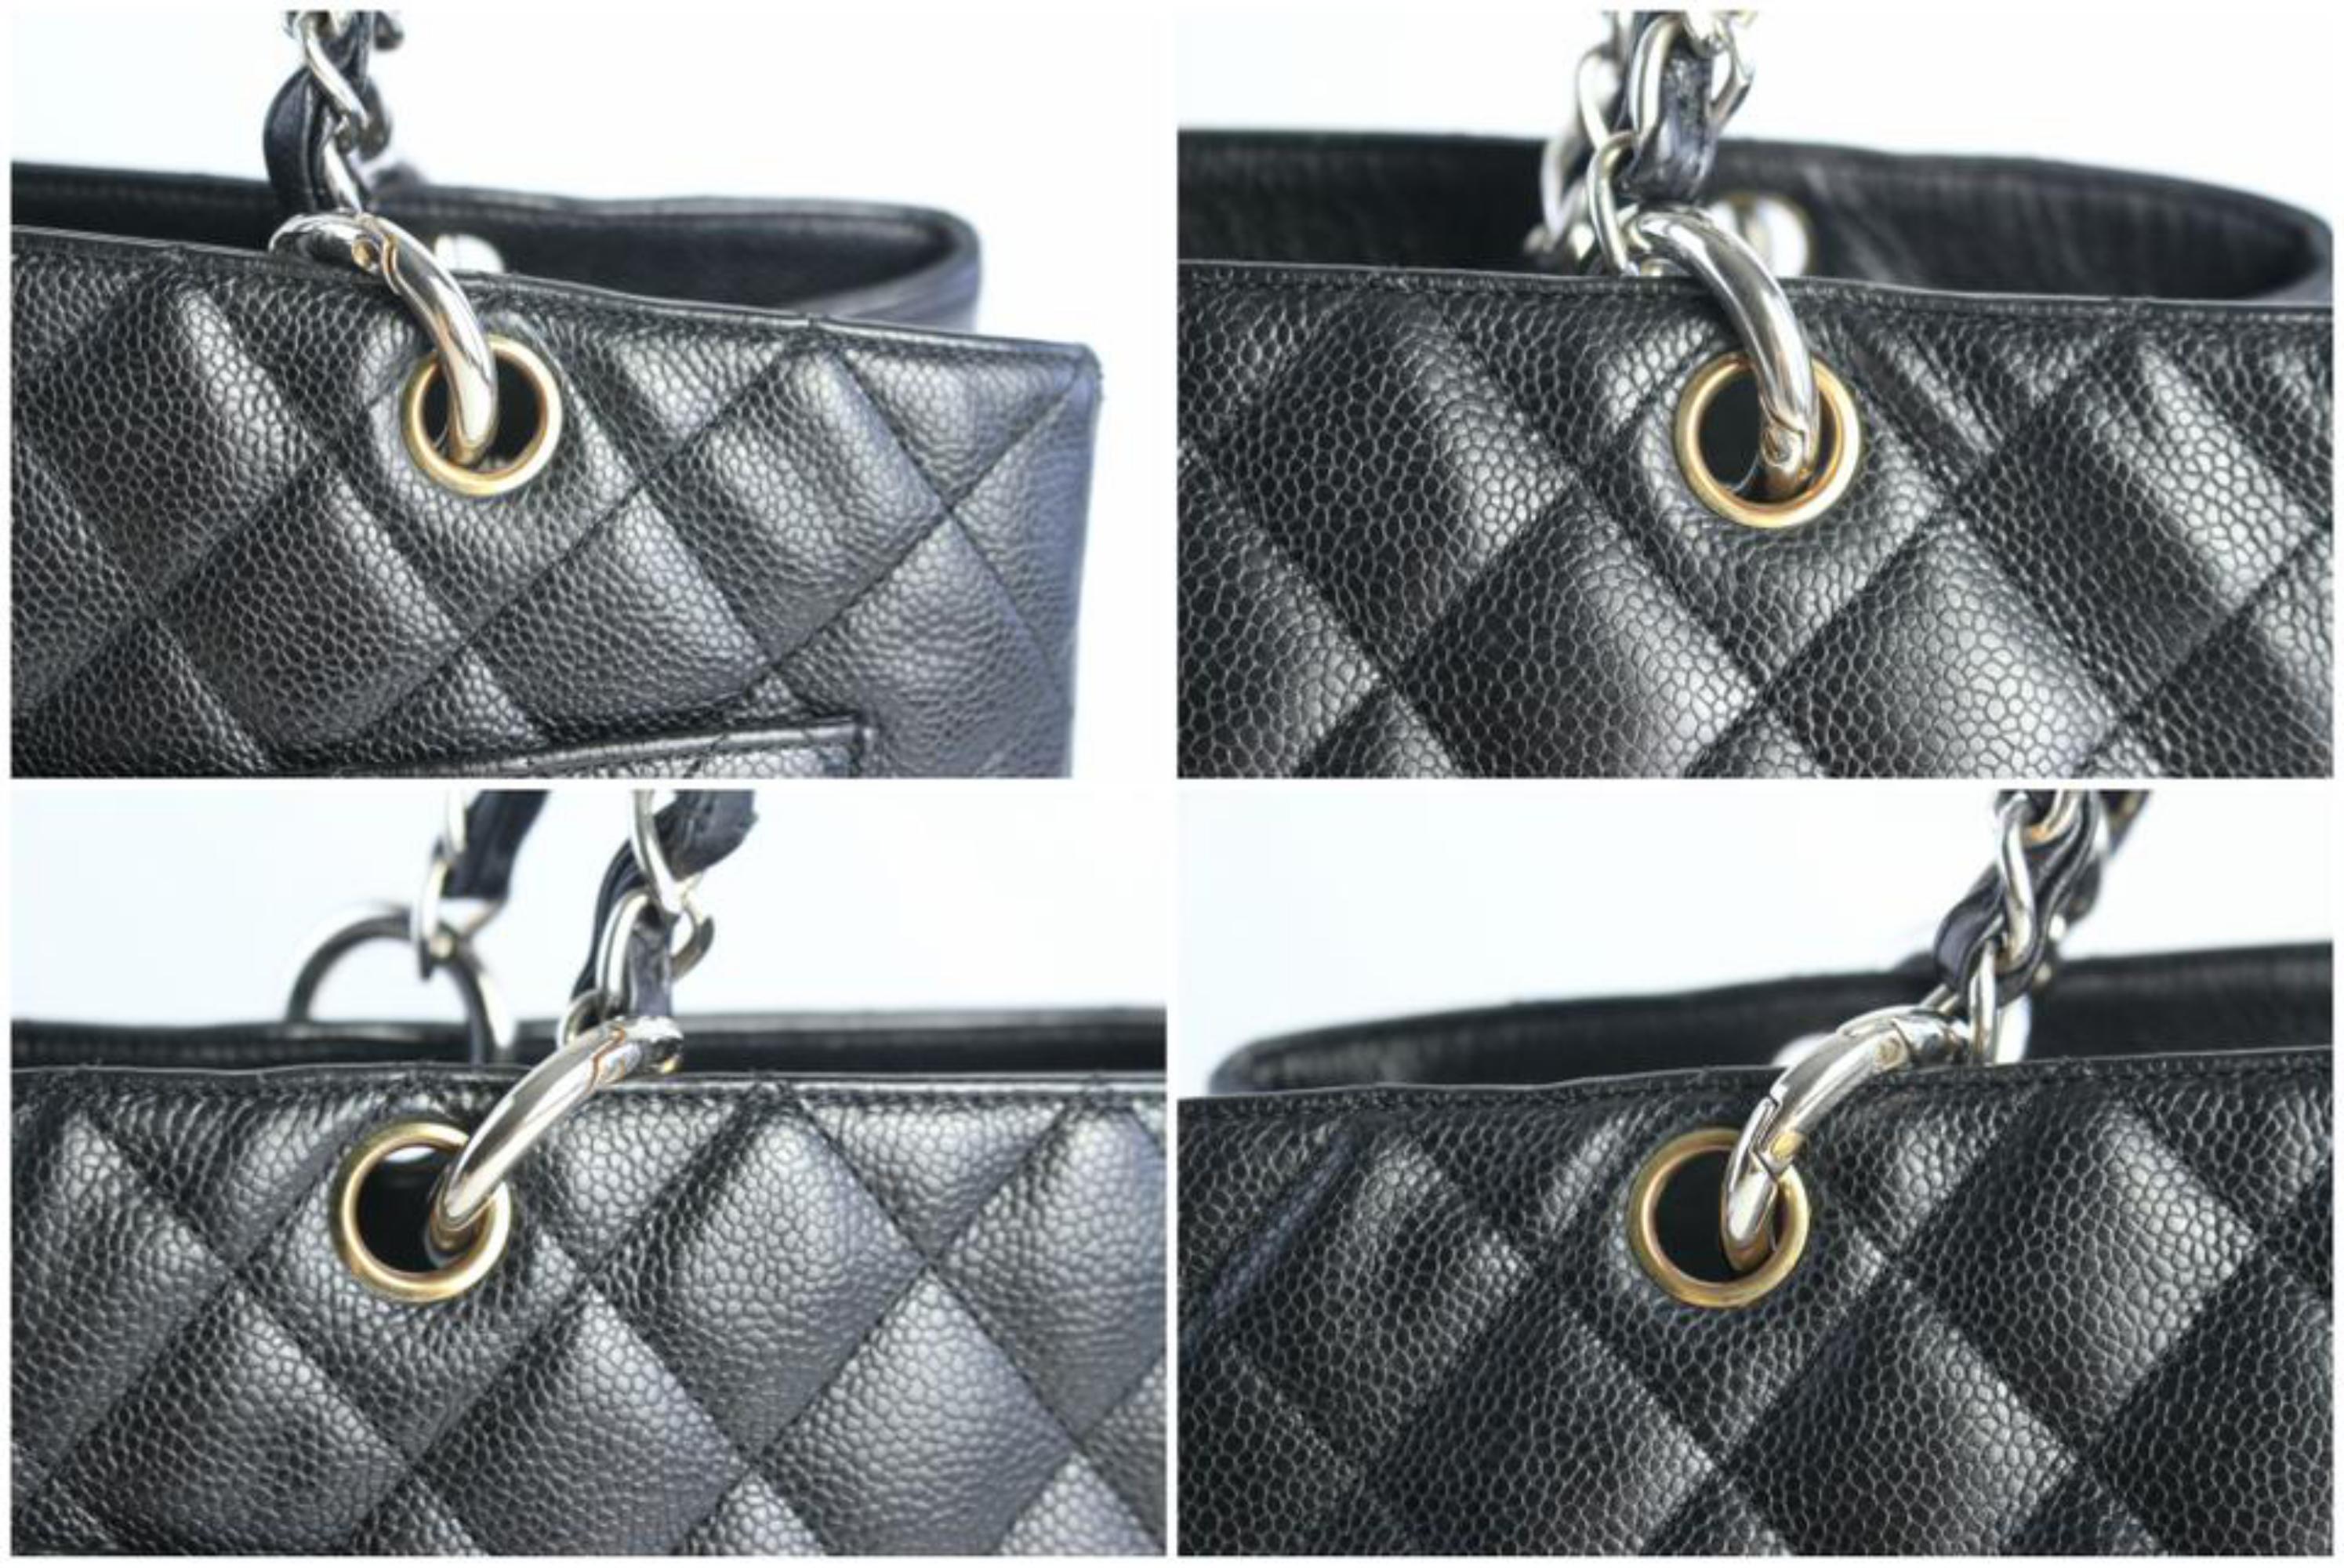 Chanel Shopping Tote Quilted Gst 17cz0828 Black Leather Shoulder Bag For Sale 7